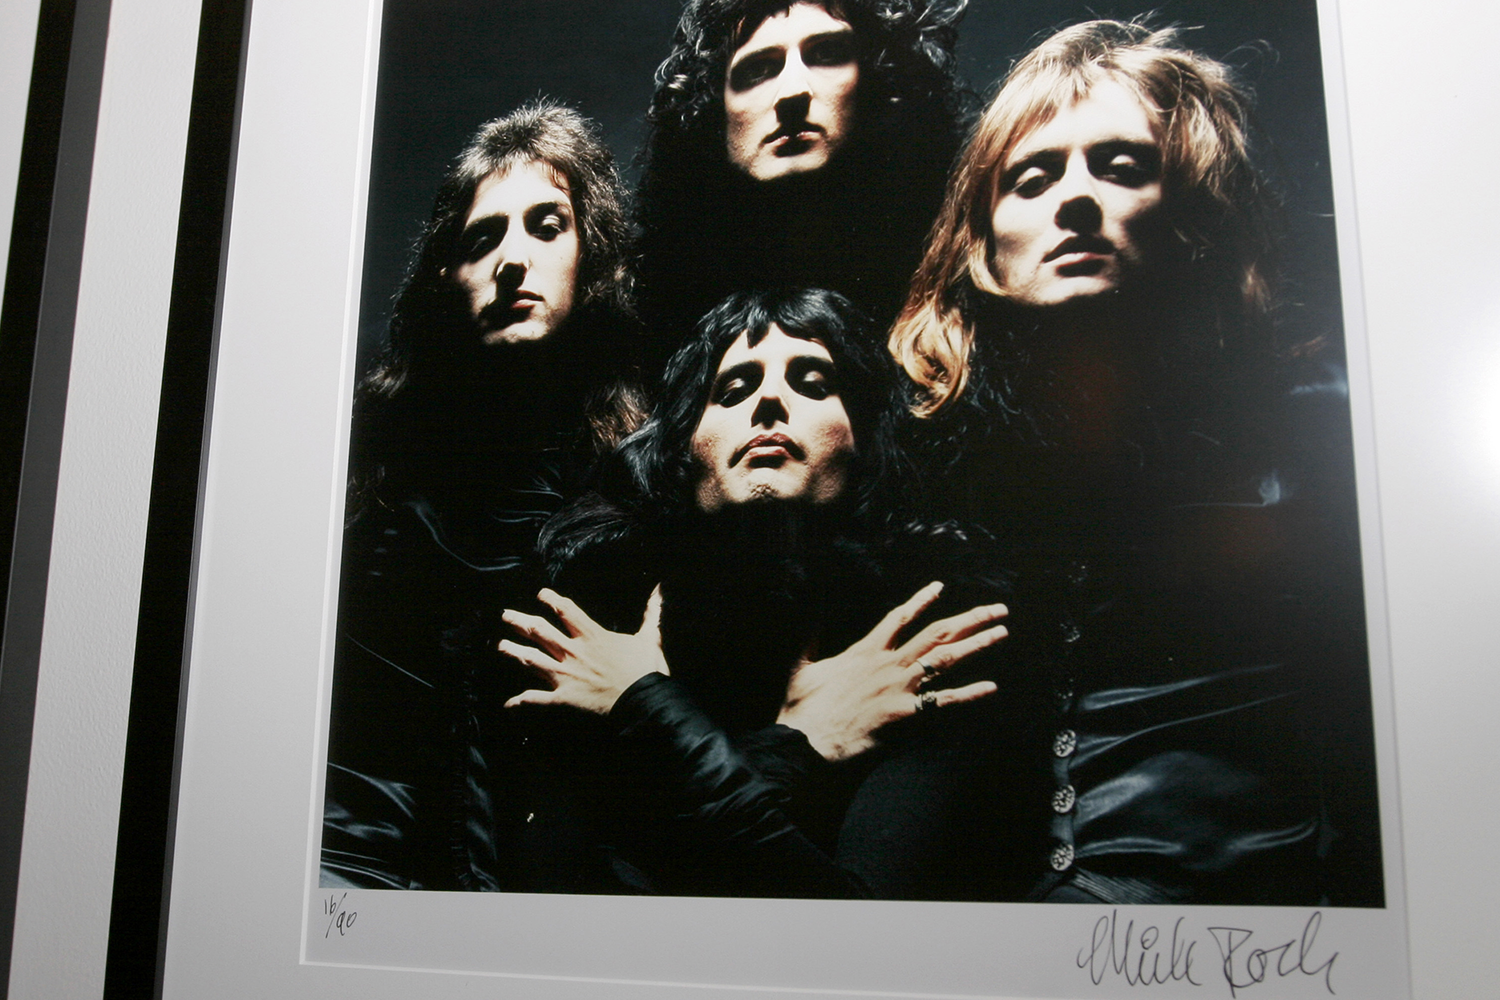 Cover photo of the album "Queen II" by Mick Rock during Mick Rock "Rock 'n' Roll Eye" Gallery Exhibit Opening at Soho Grand